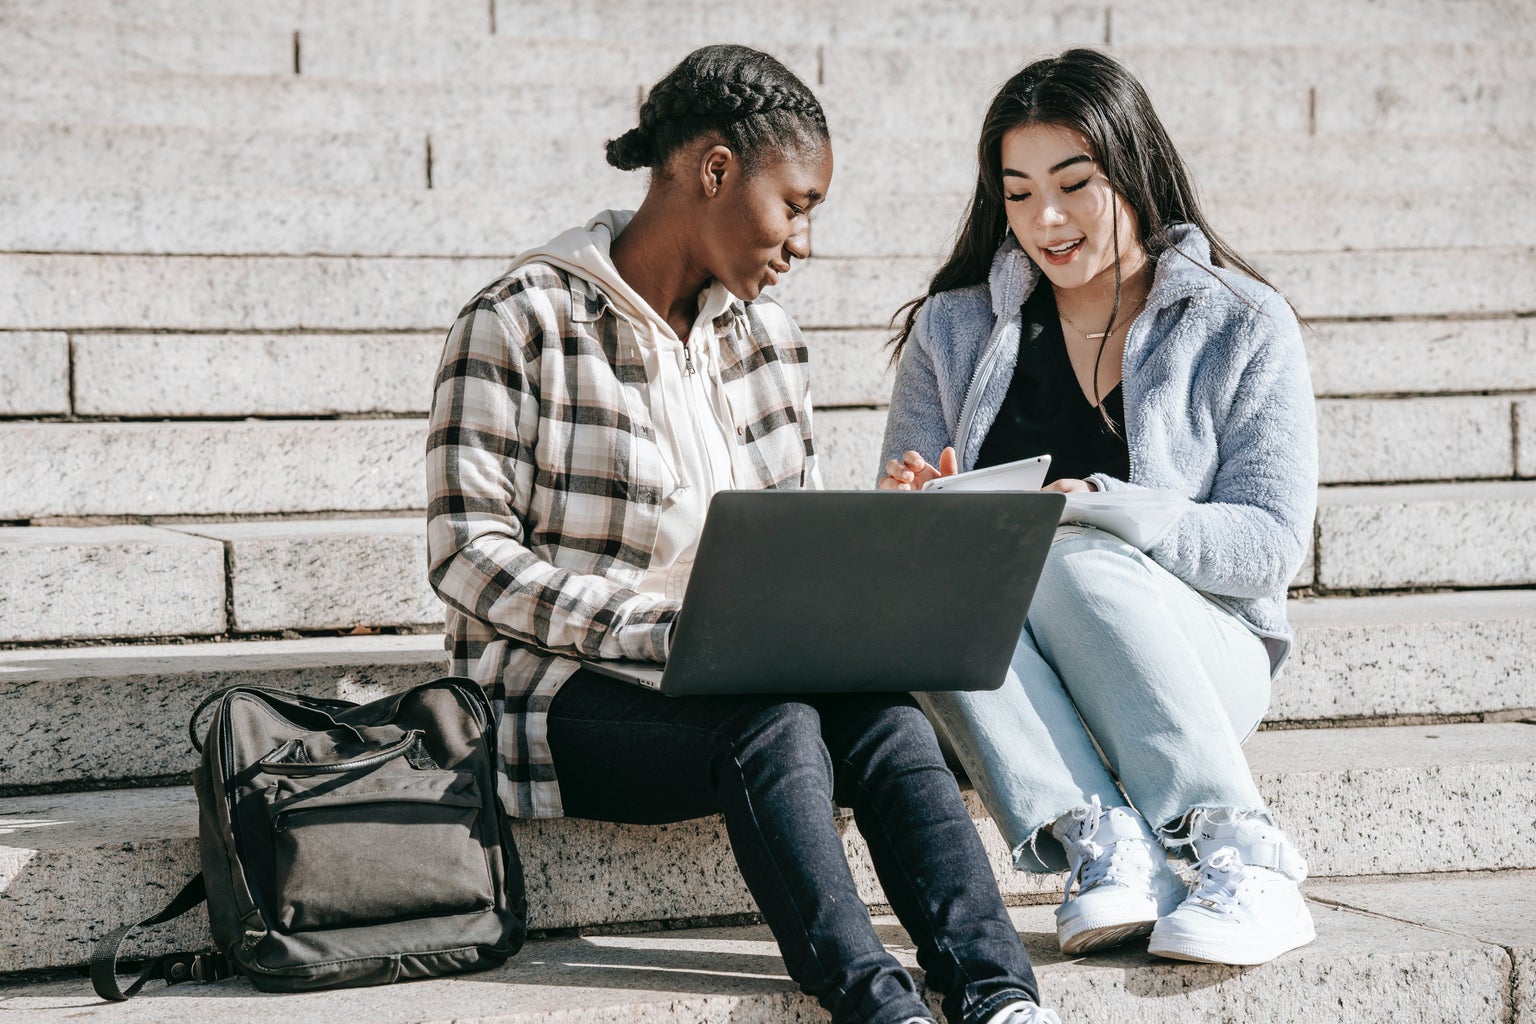 students on campus studying together